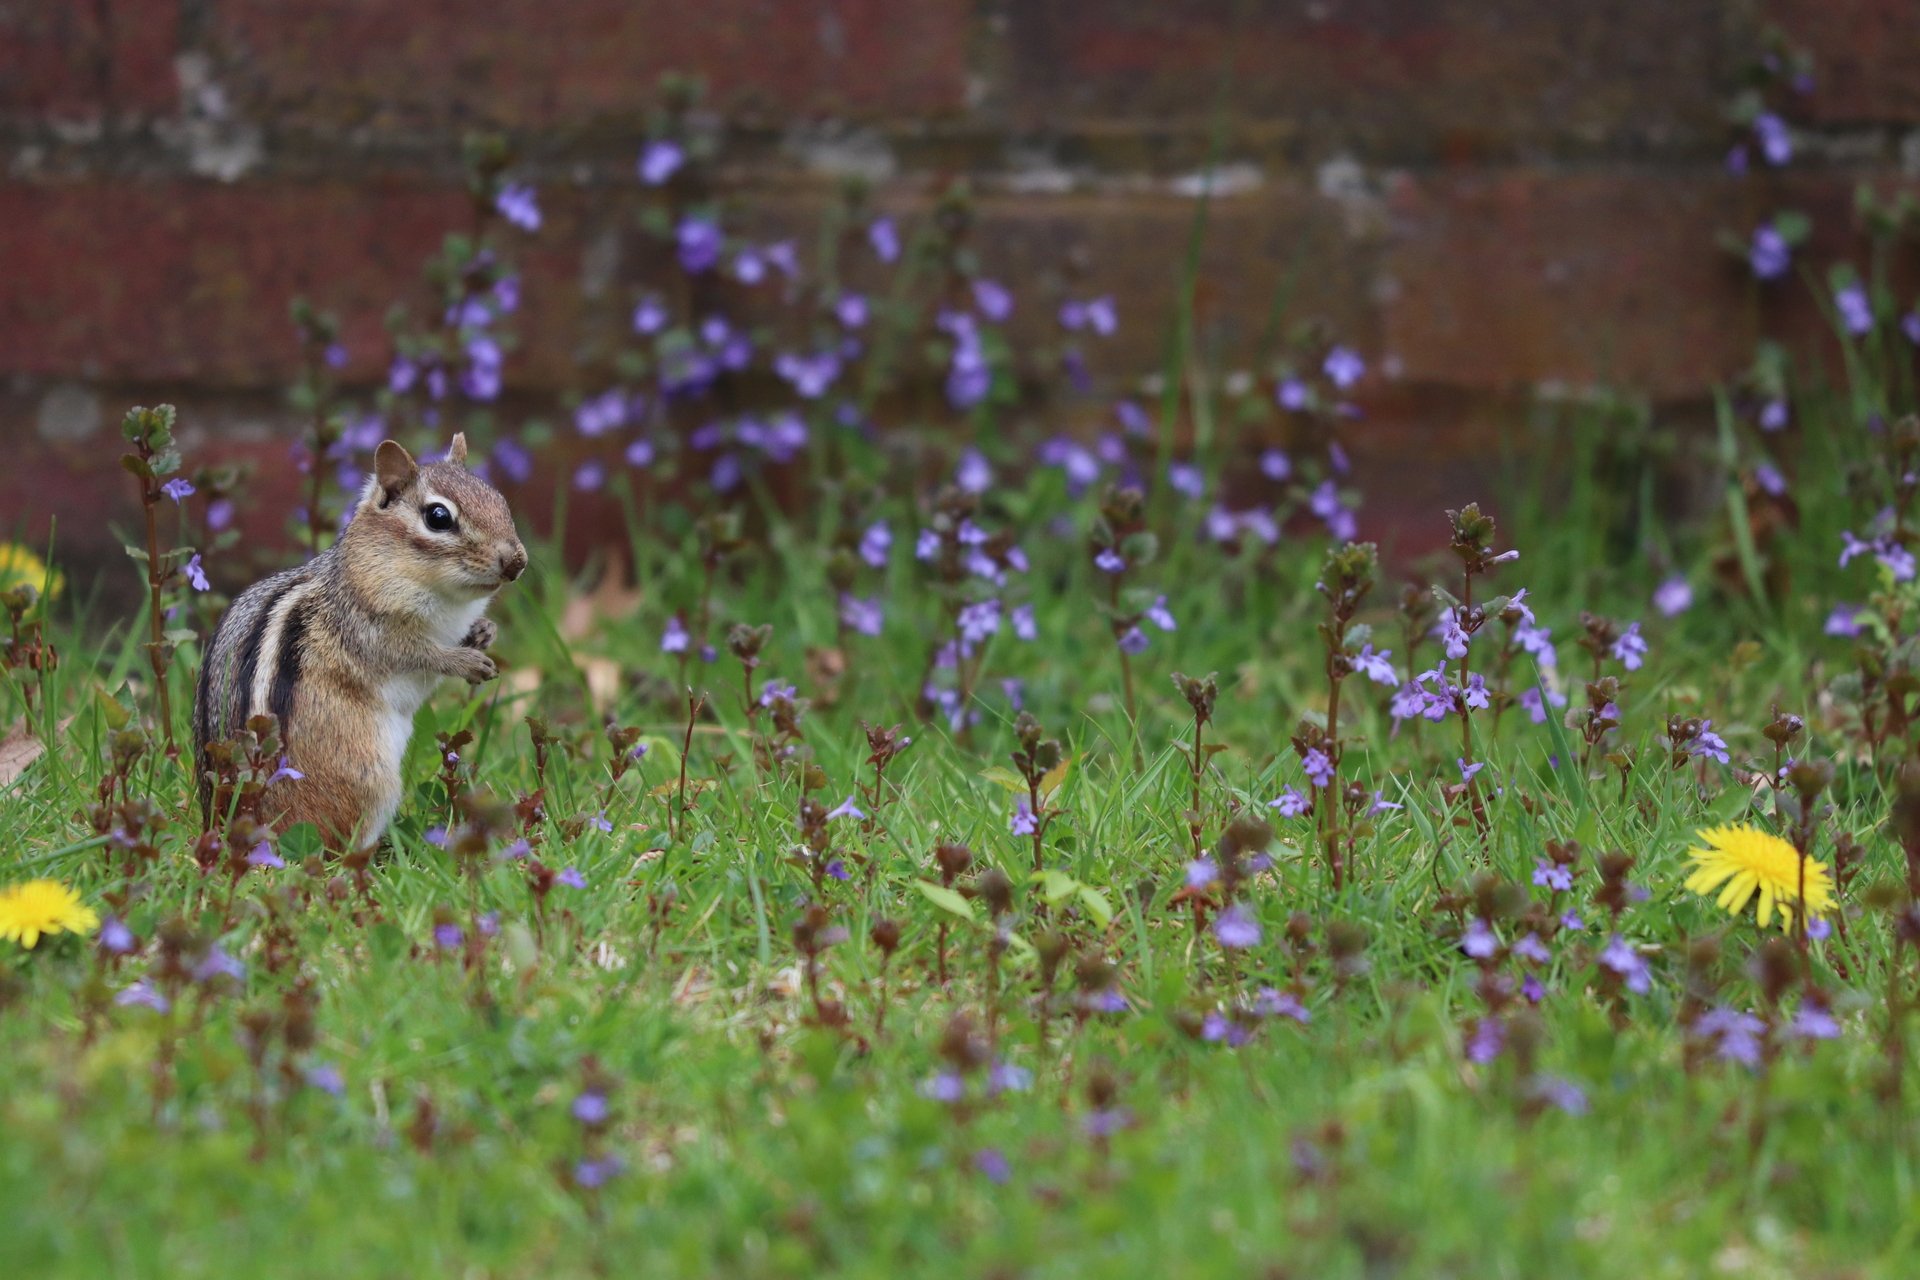 A chipmunk standing on its hind legs in purple and yellow flowers.